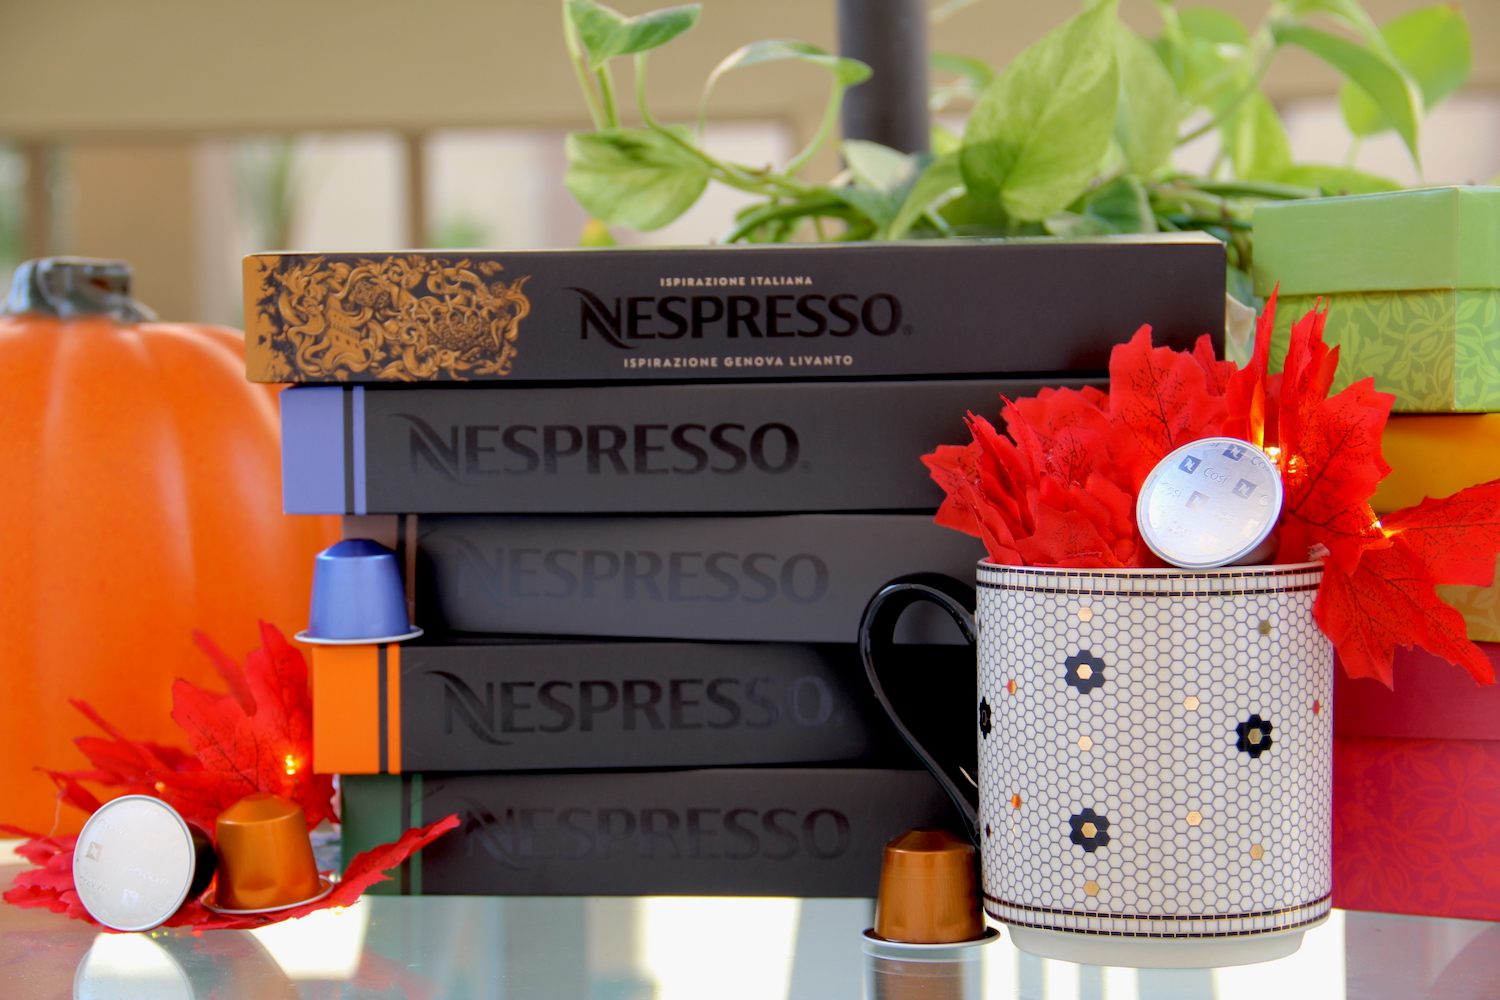 Nespresso capsules, bed bath and beyond, coffee